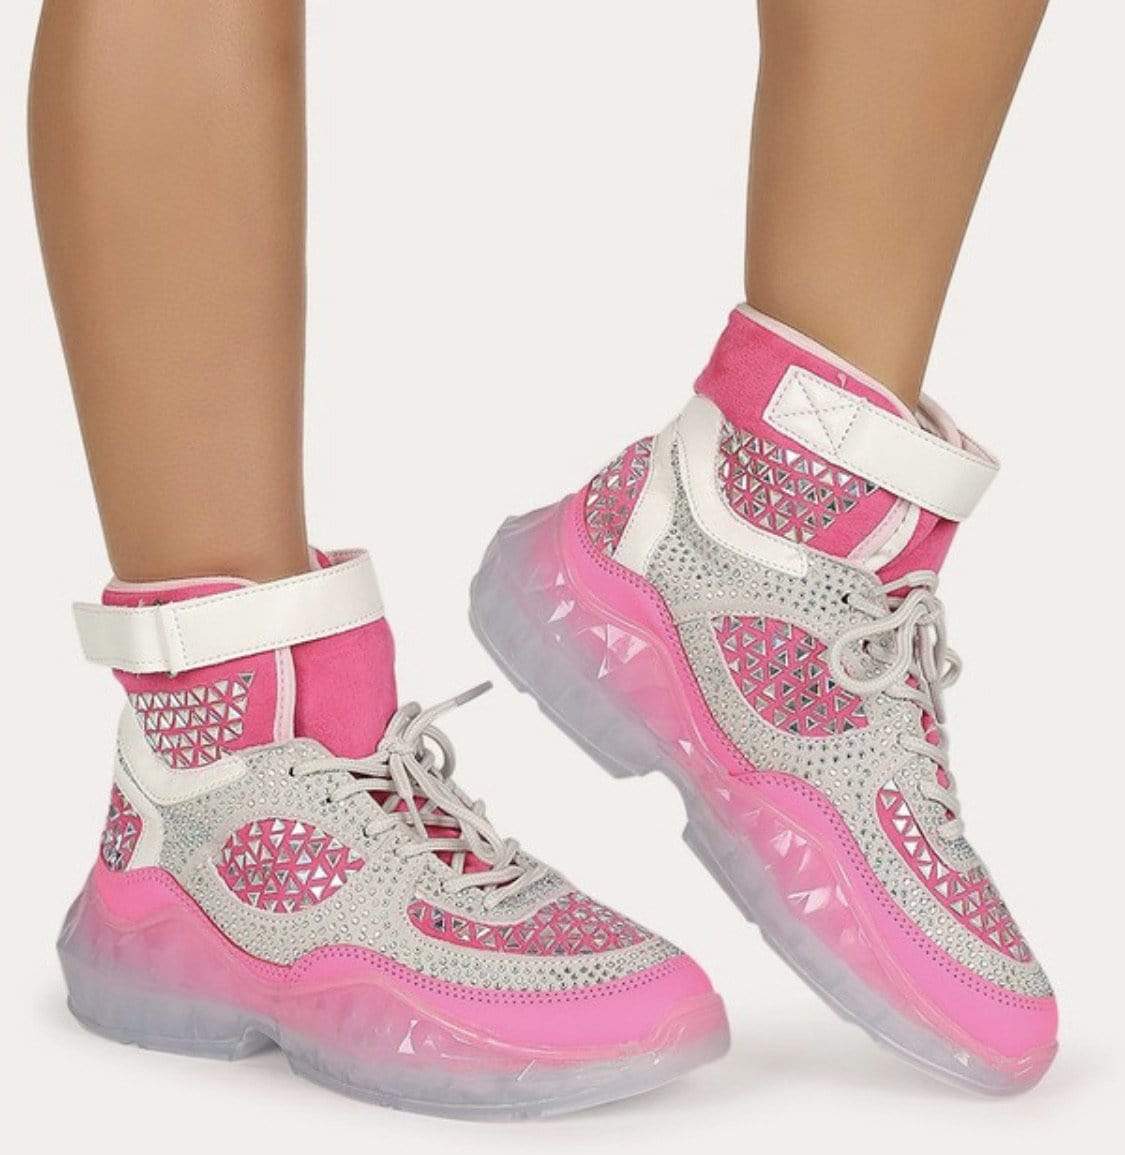 Cape Robbin Shoes Hi Top Lace Up Neon Pink Rhinestone Sneakers